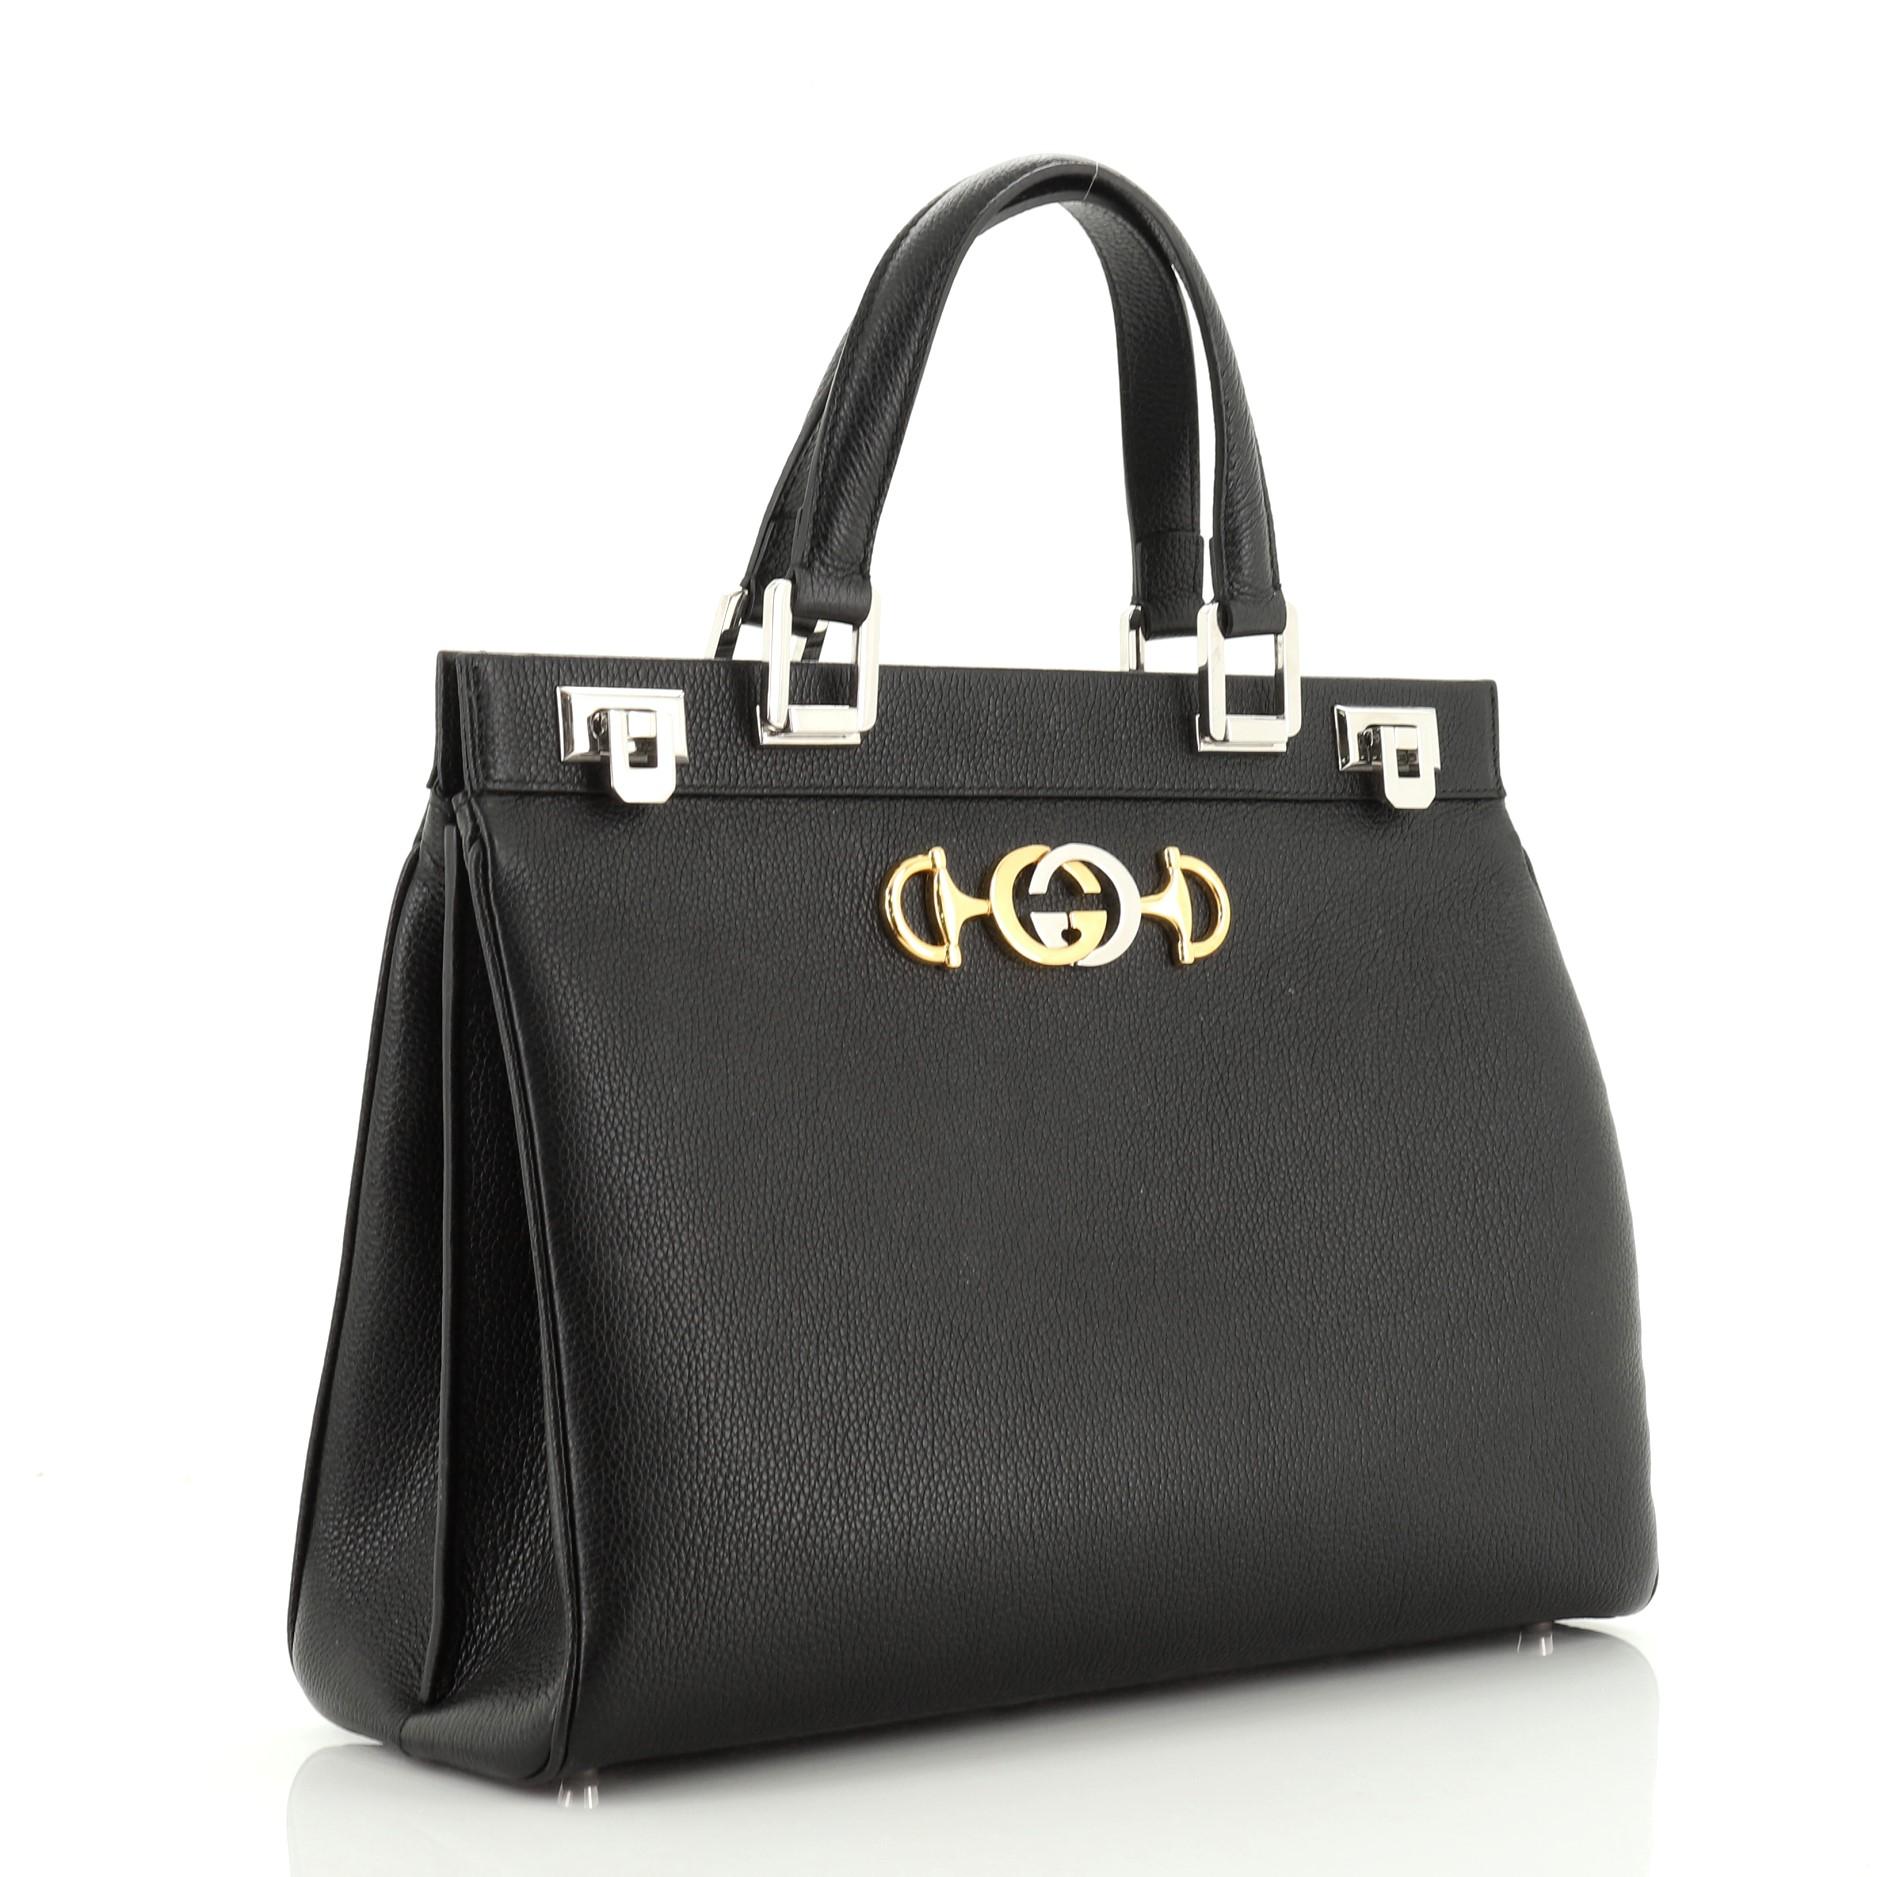 This Gucci Zumi Top Handle Bag Leather Medium, crafted in black leather, features dual leather handles, Interlocking G Horsebit detail, top frame with a hinged lock on each side and gold and silver-tone hardware. Its flip-lock closure opens to a red